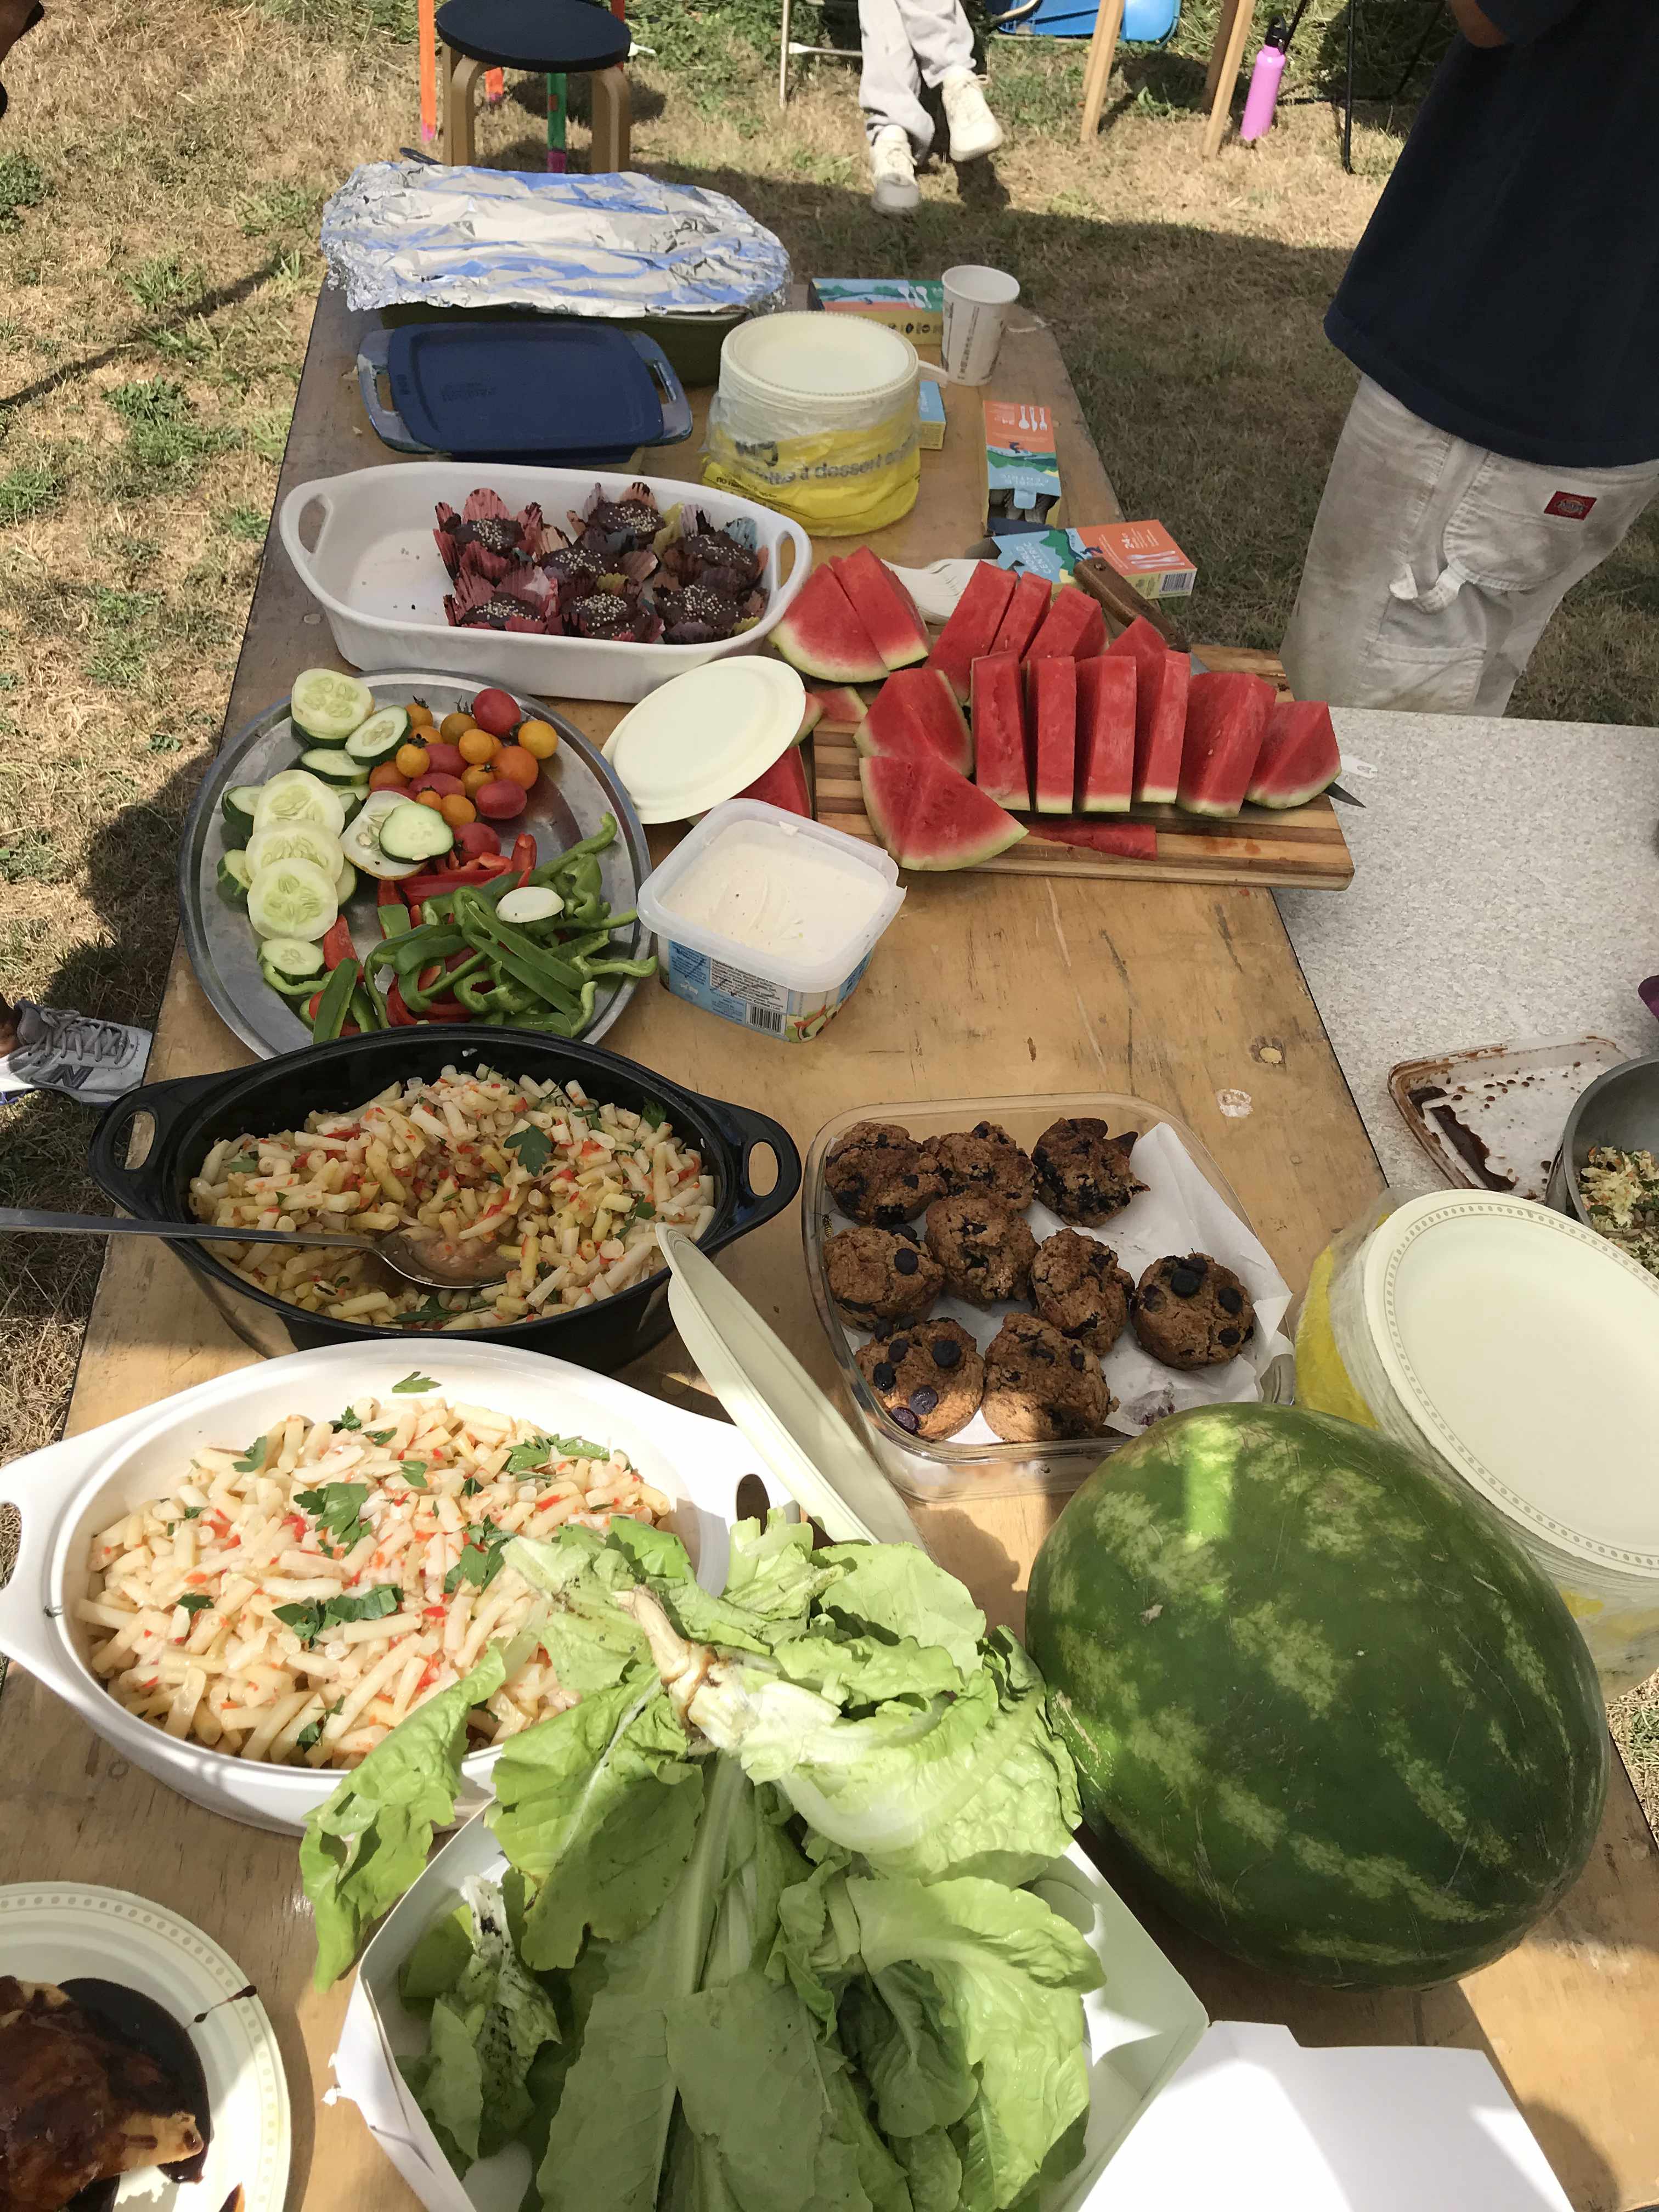 a picnic table full of varius food items, watermelons, chopped veggies, beans, lettuce